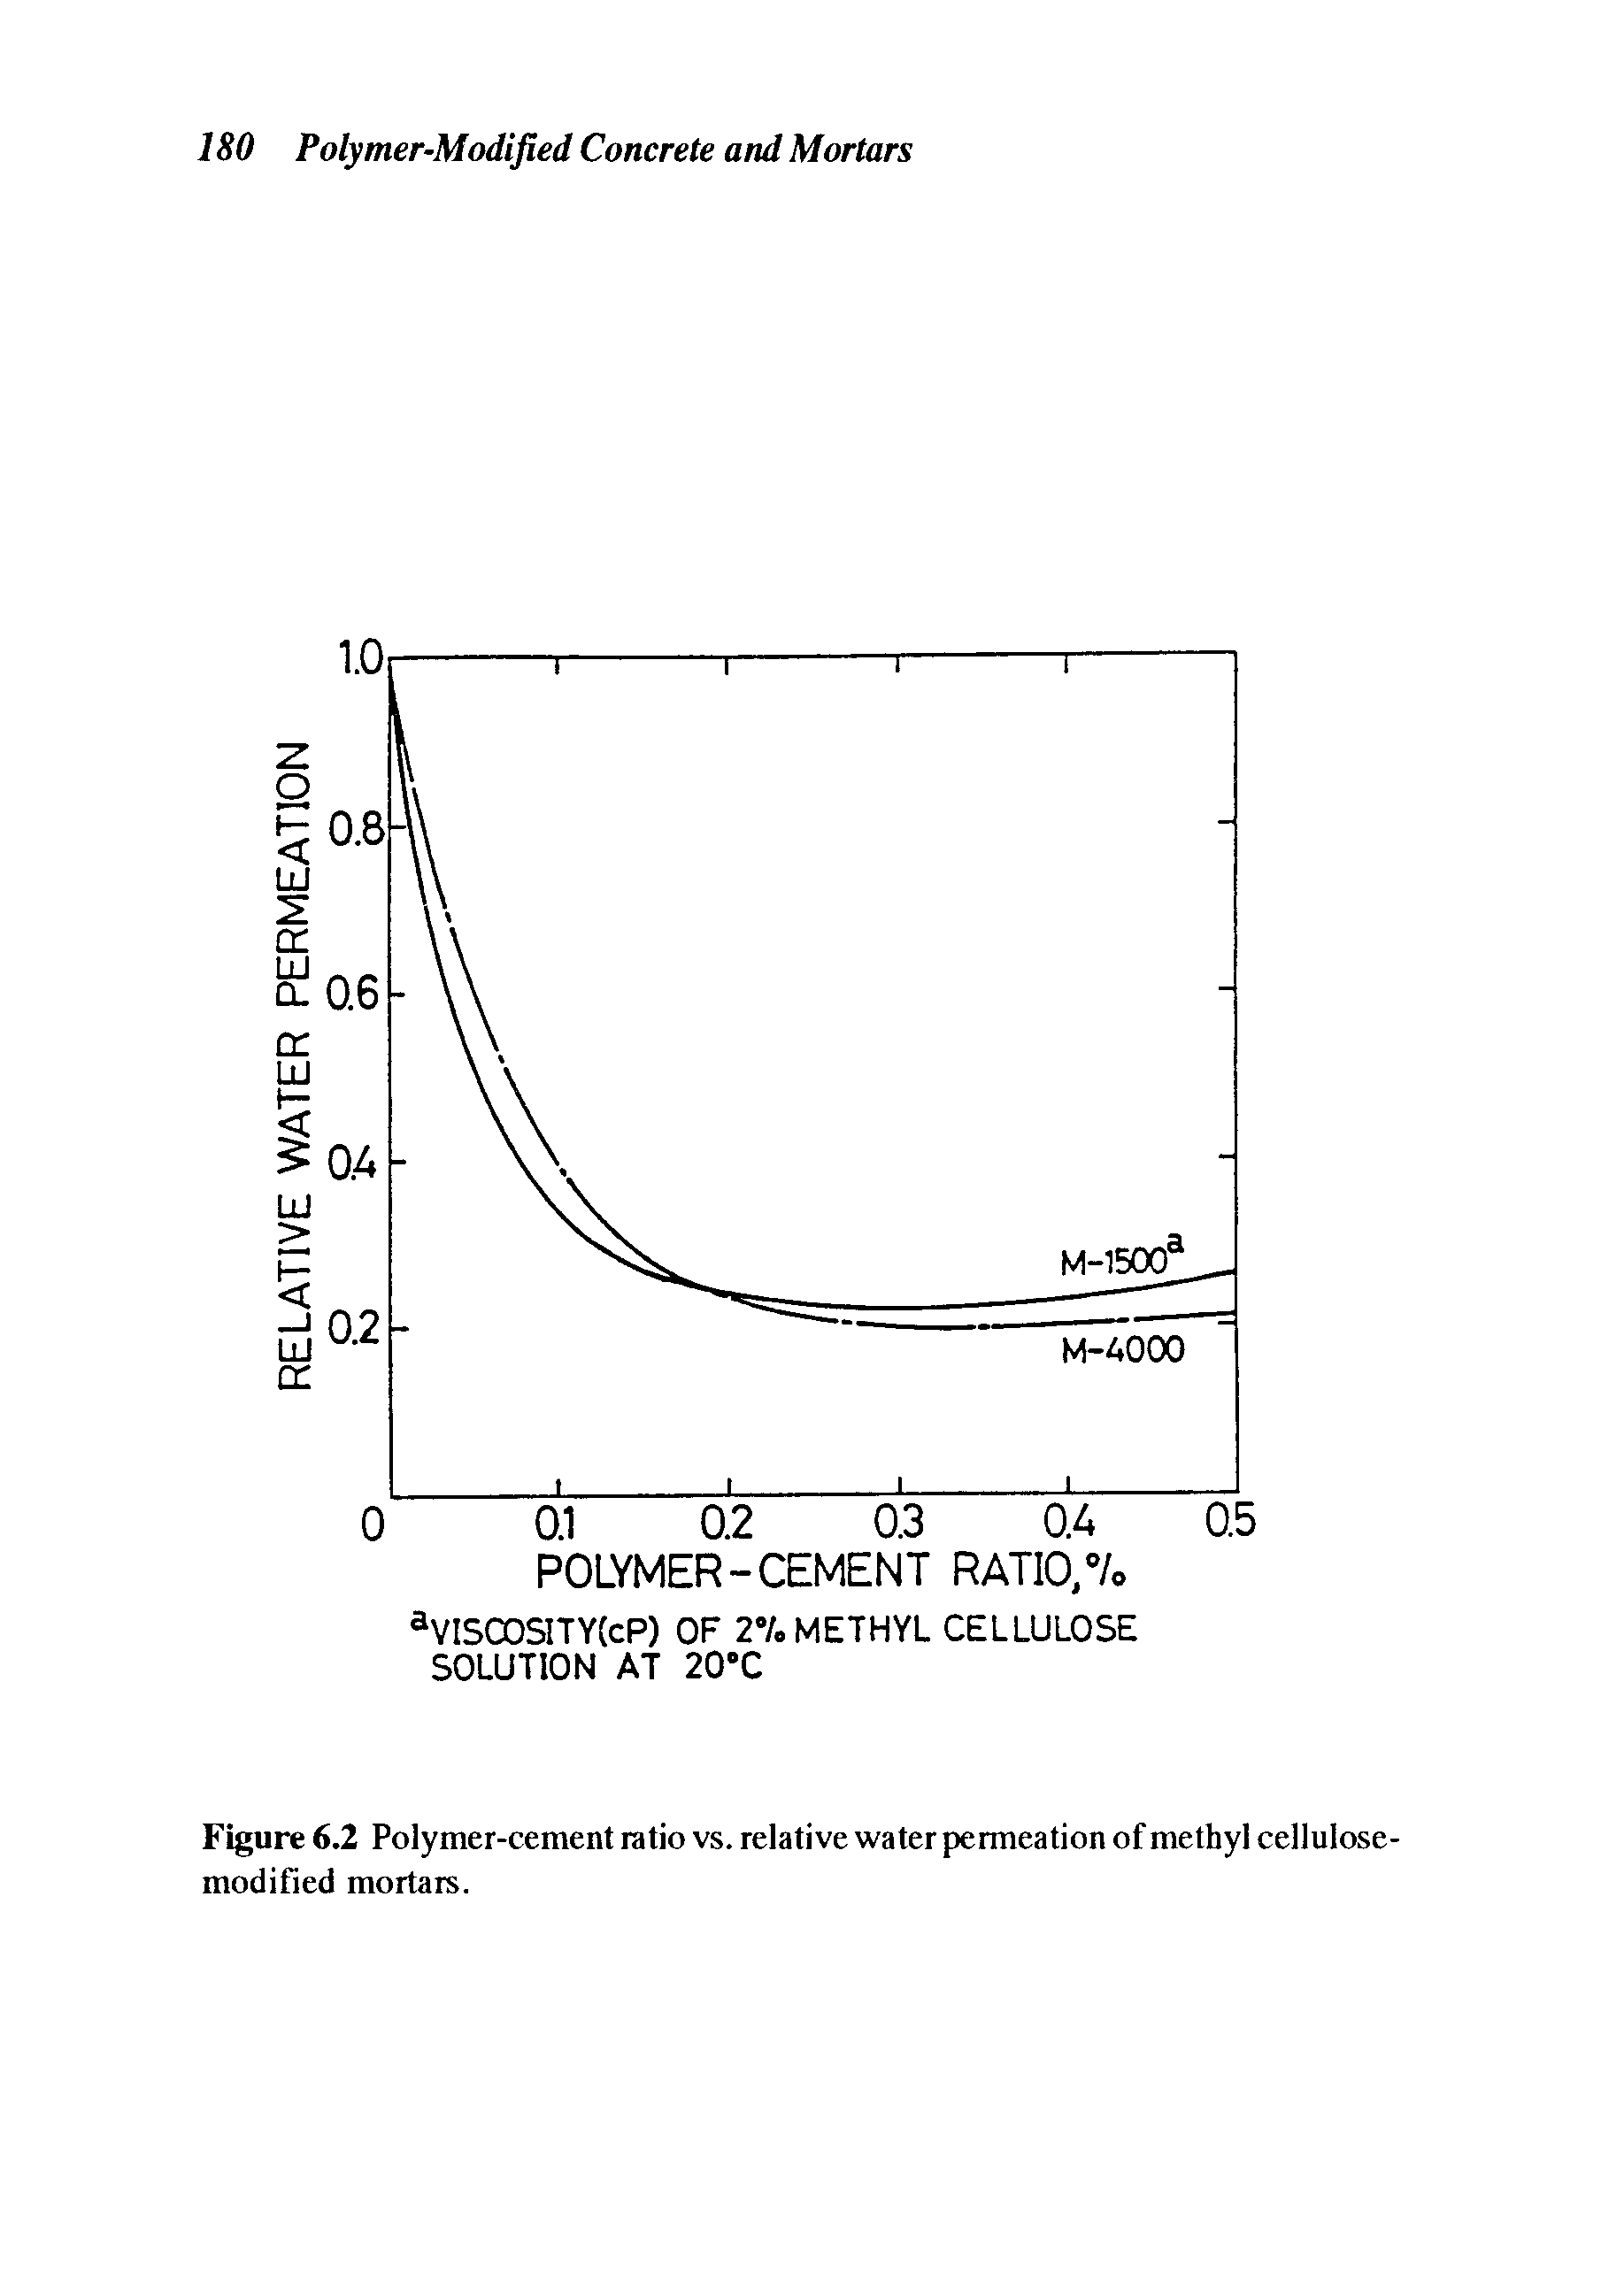 Figure 6.2 Polymer-cement ratio vs. relative water permeation of methyl cellulose-modified mortars.